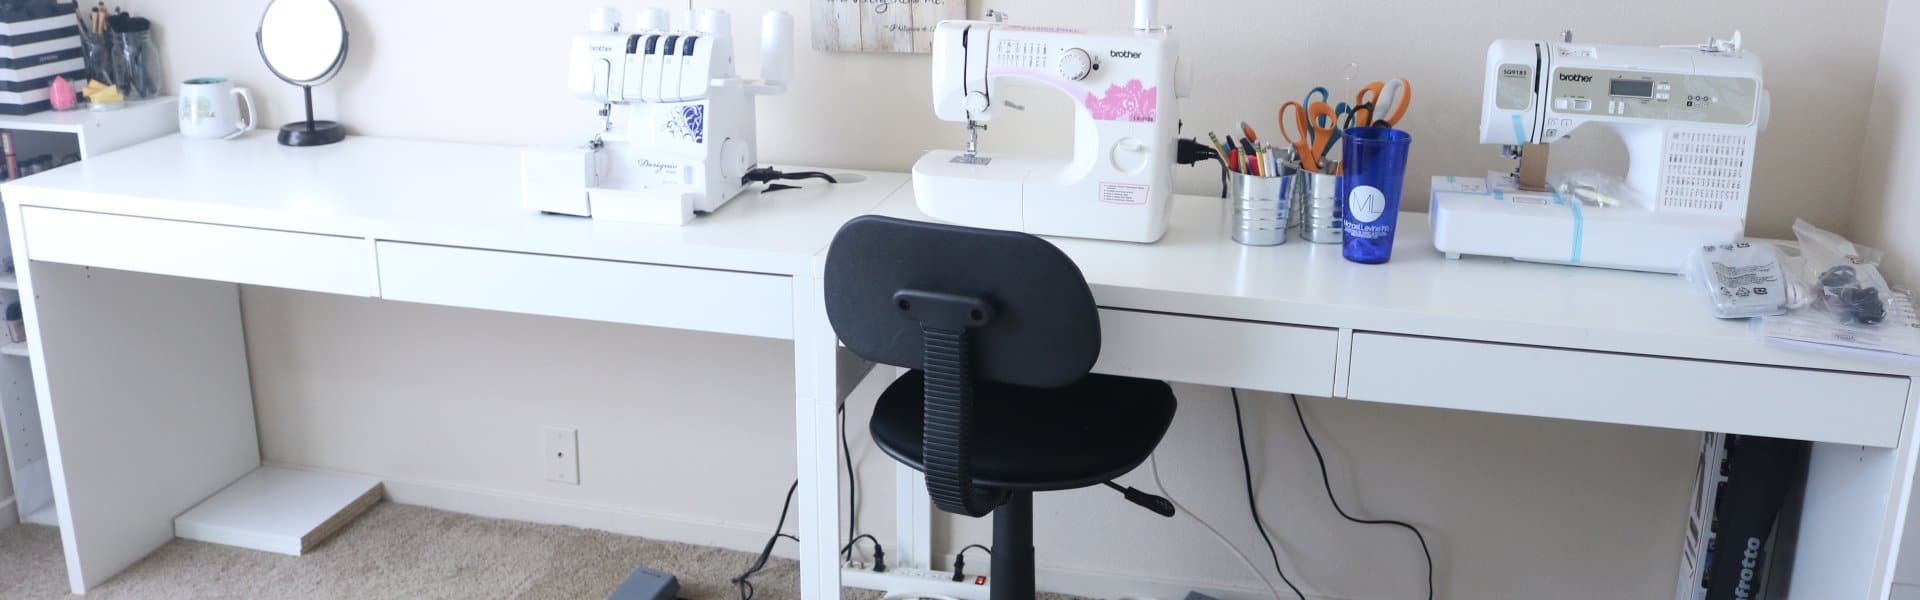 7 Best Chairs for Sewing Room (Spring 2022) — Reviews & Buying Guide